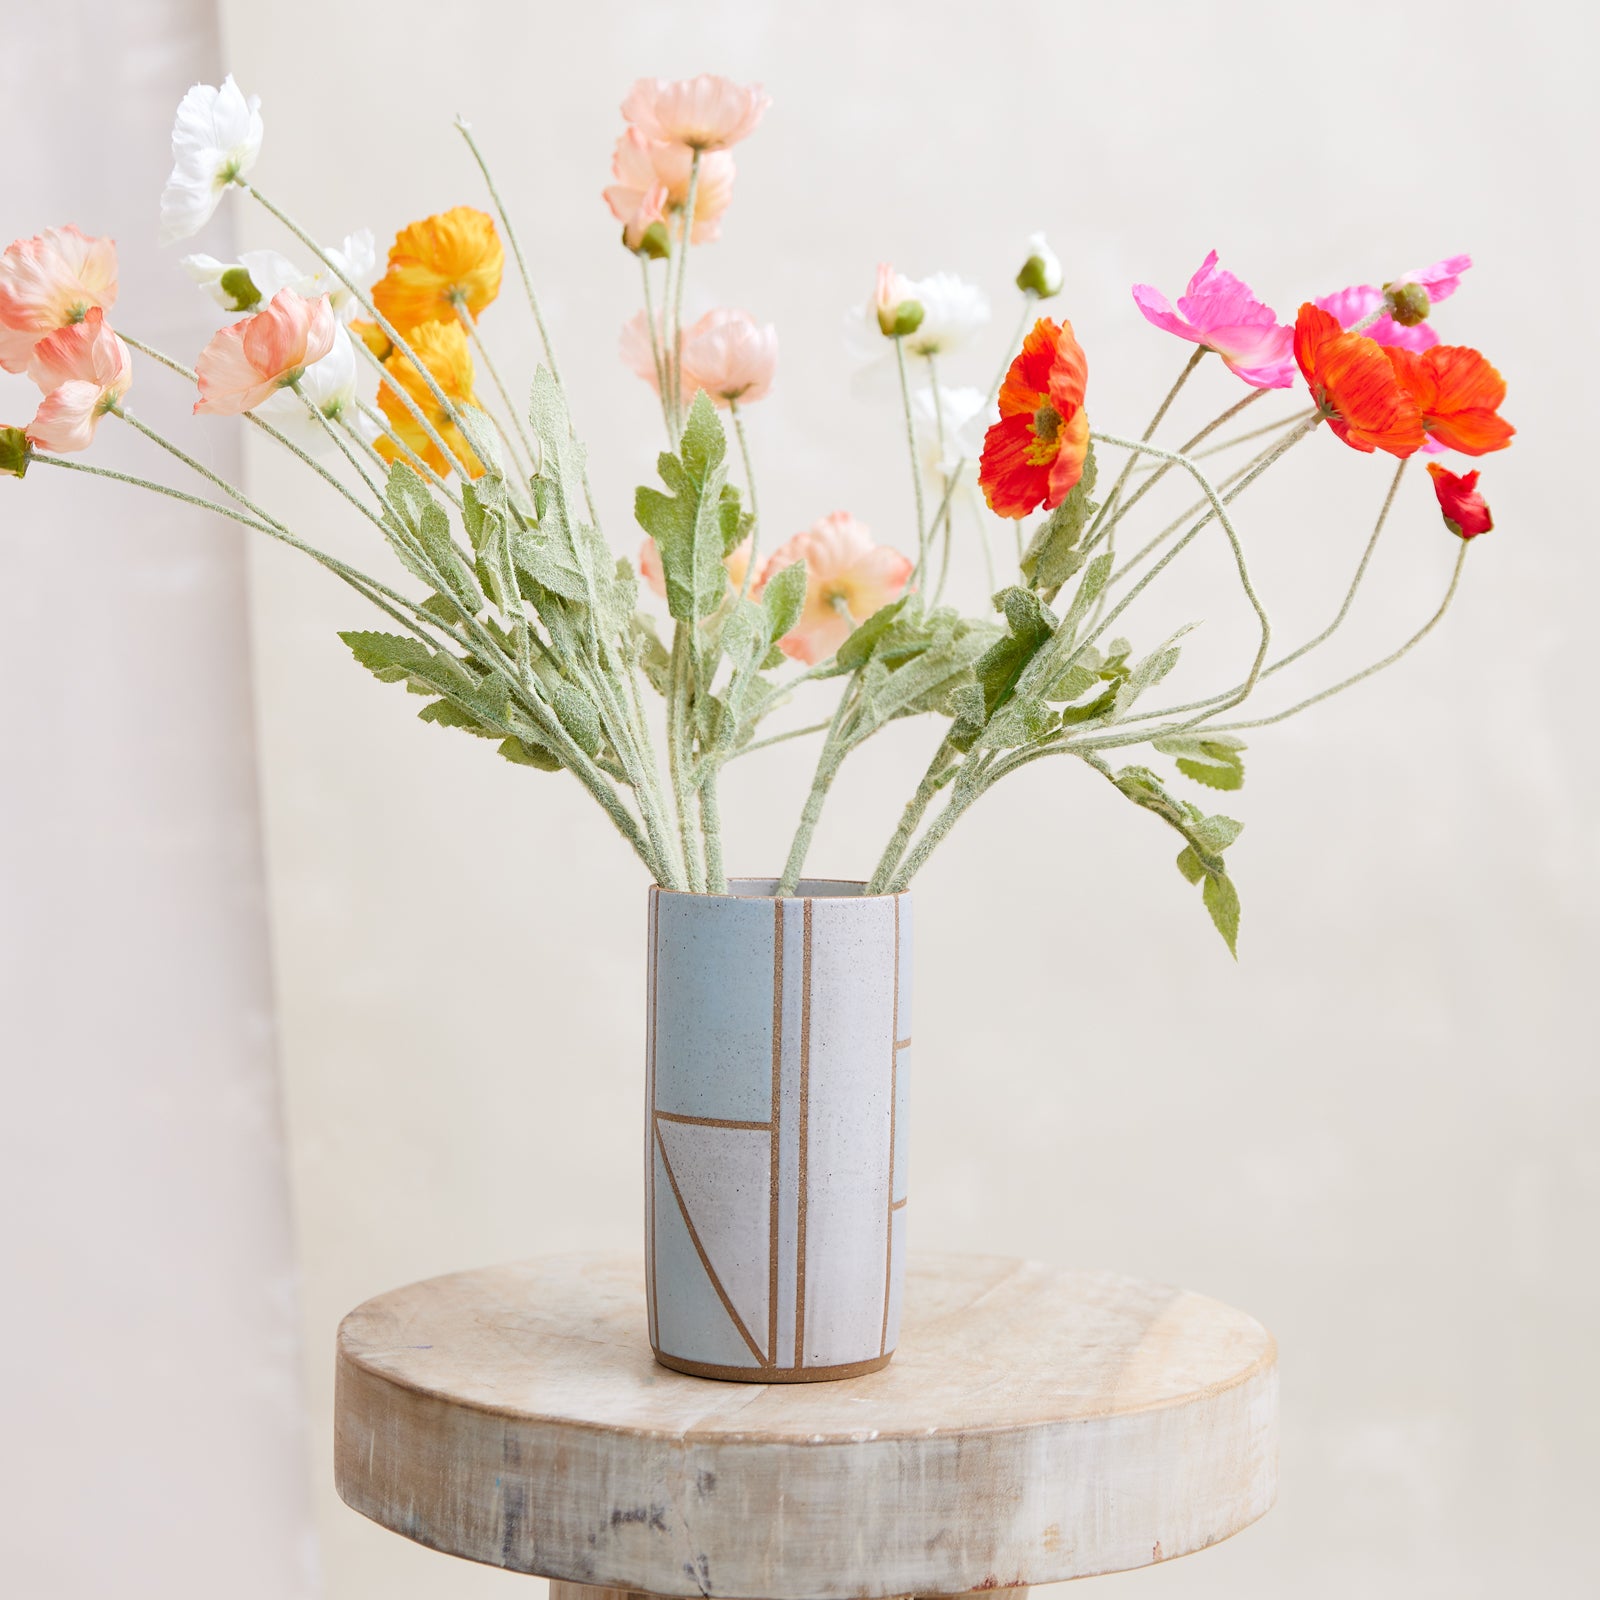 A front view of the Geometric Cylindrical Handmade Ceramic Vase in a blue, white and grey glaze. The handmade vase sits on a wooden stool in a coastal-styled setting. The ceramic vase displays fresh flowers.